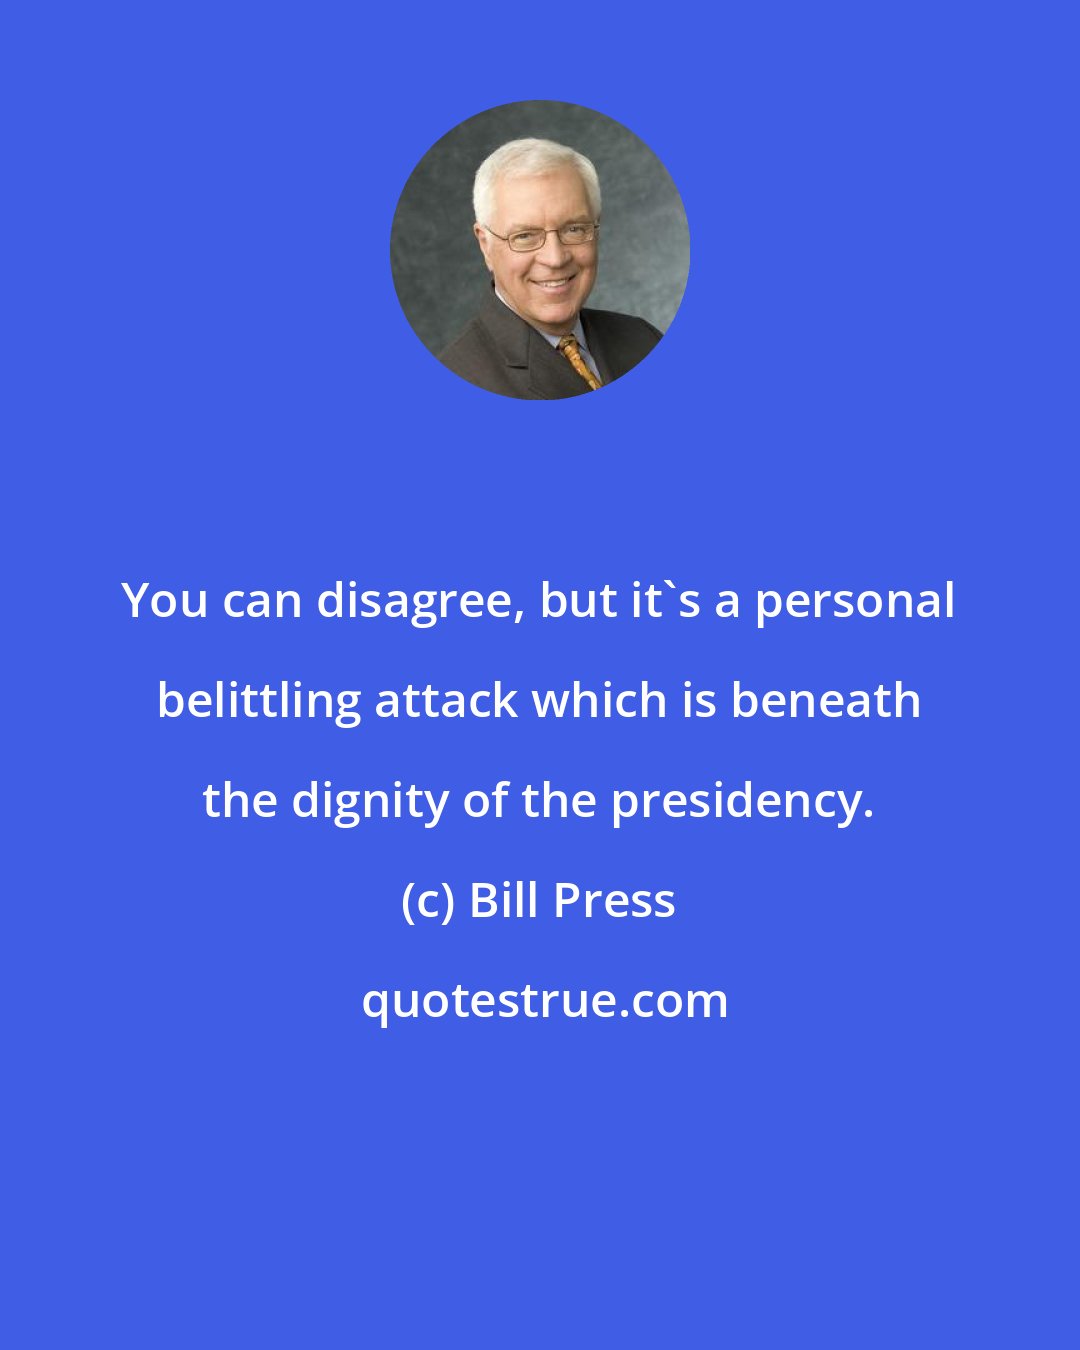 Bill Press: You can disagree, but it`s a personal belittling attack which is beneath the dignity of the presidency.